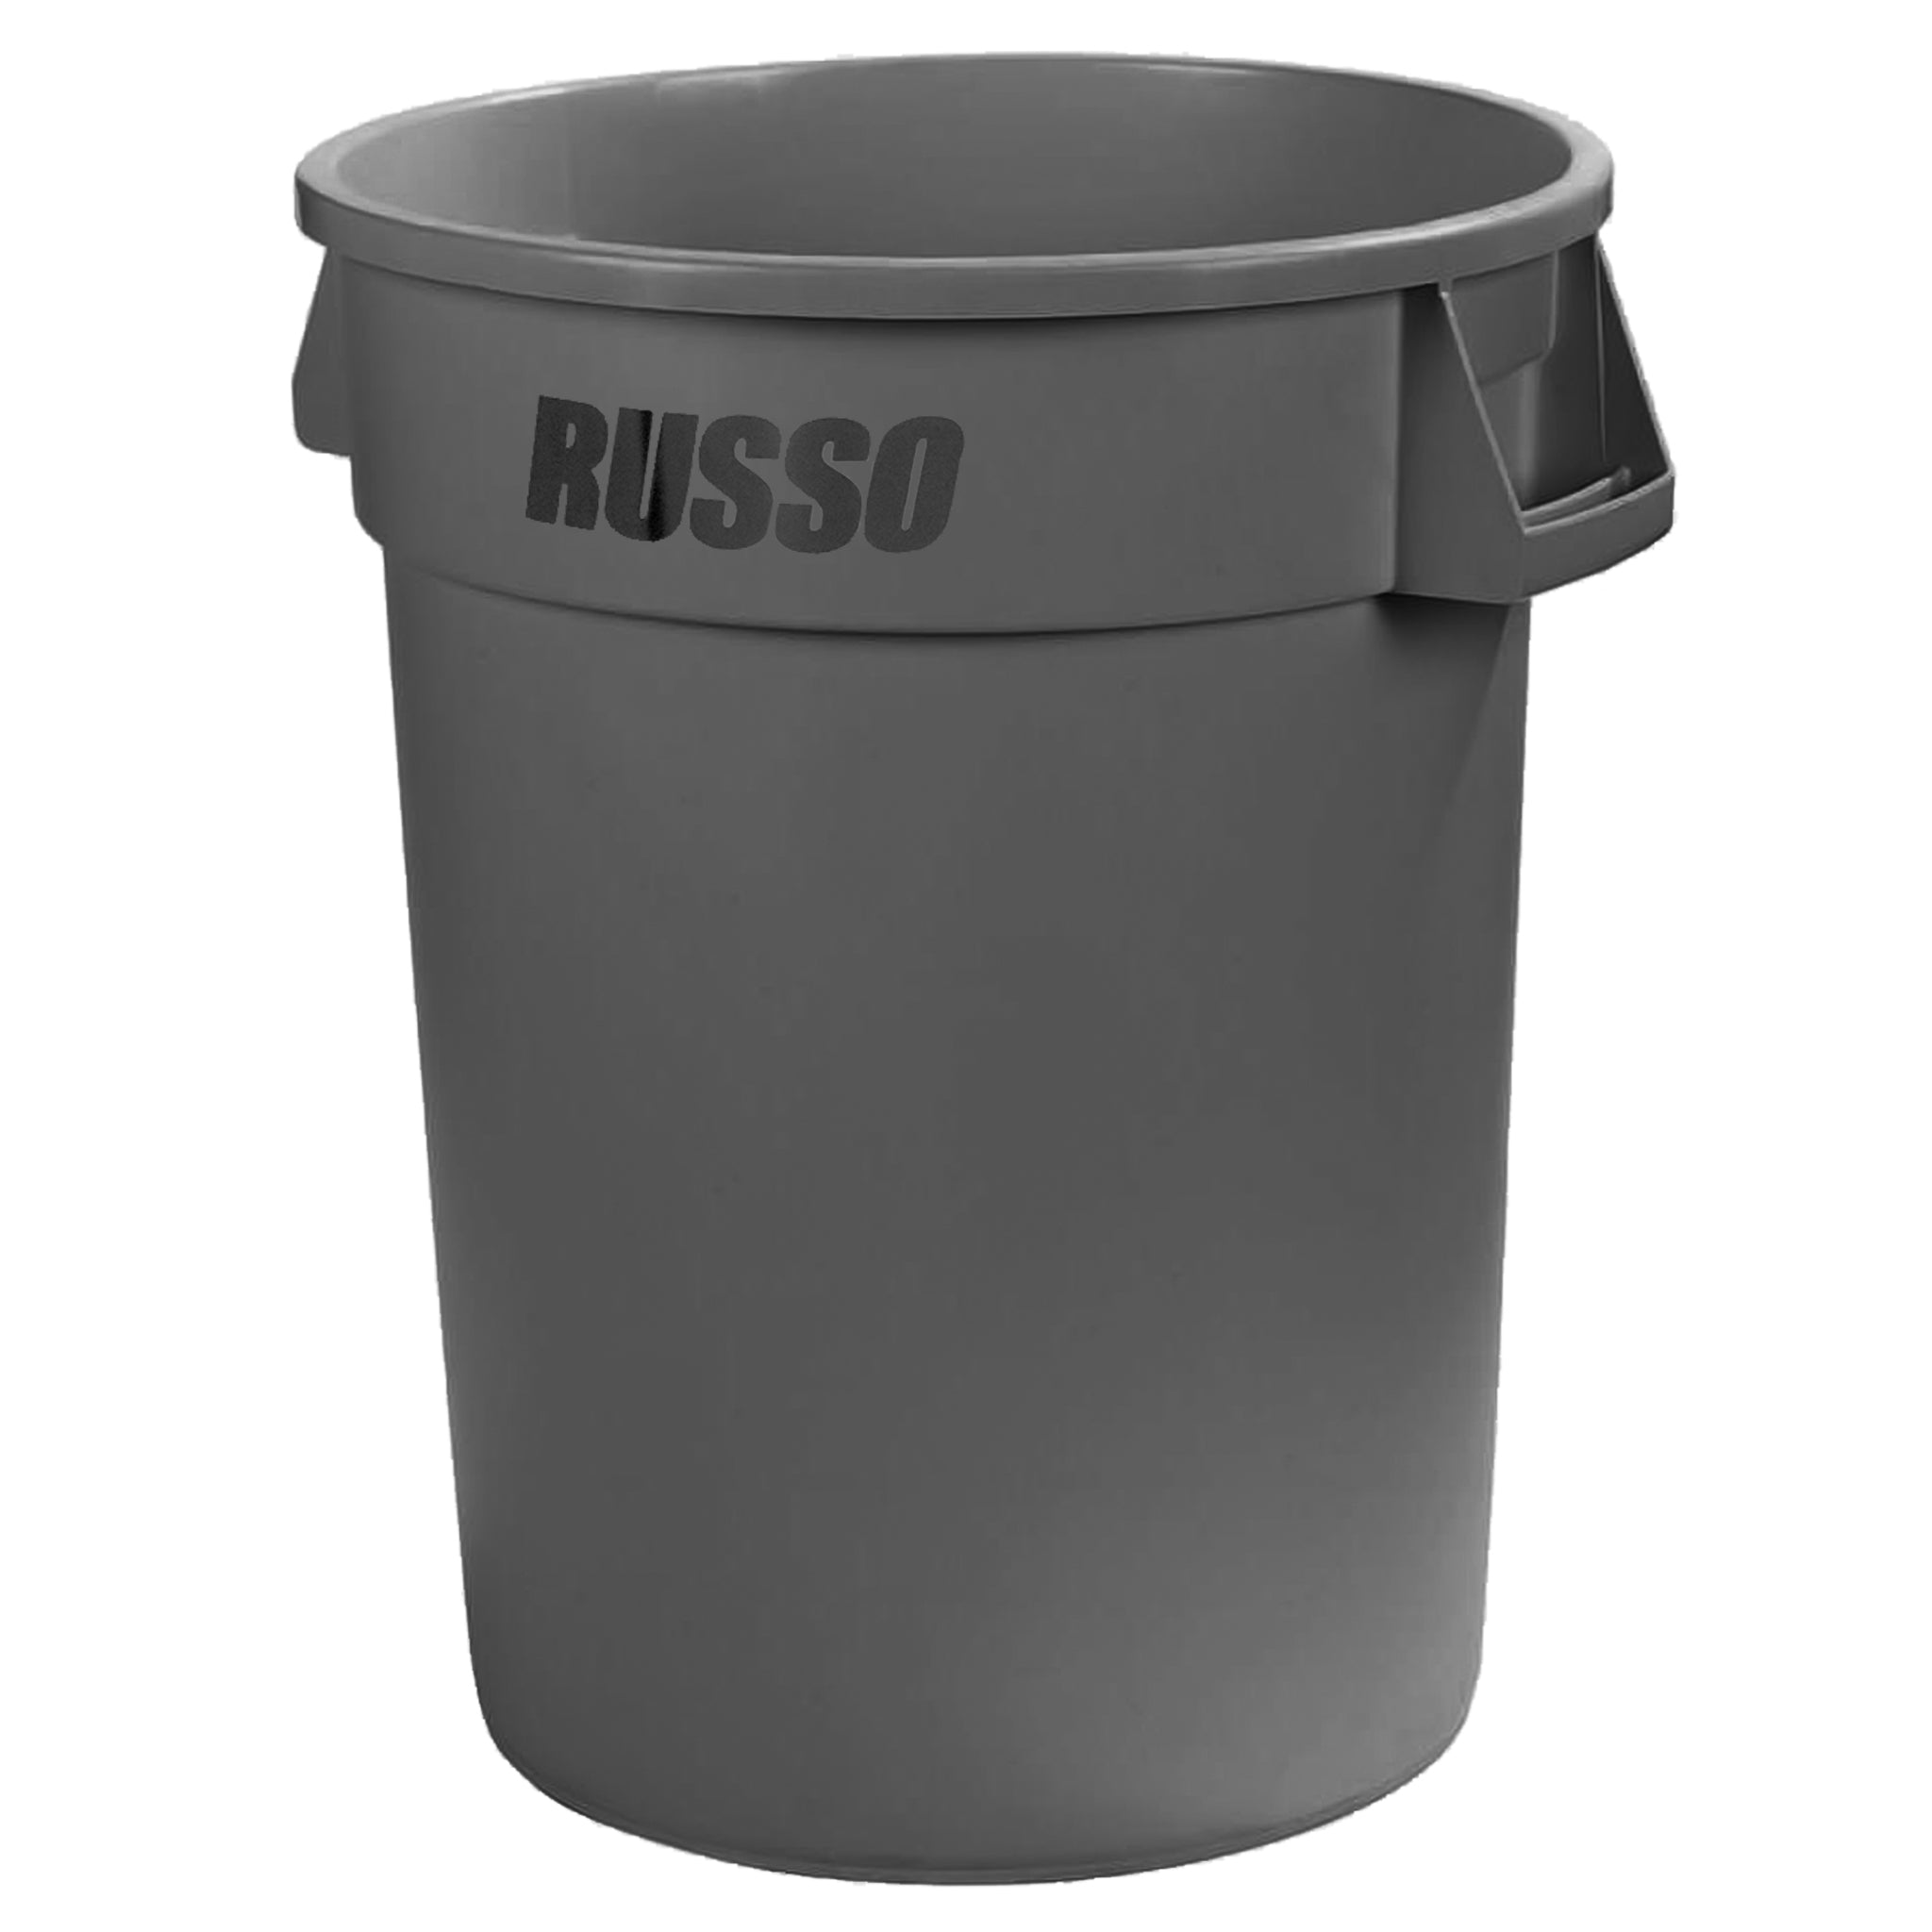 RUSSO Glow Garbage Can 32 Gallon - Gray